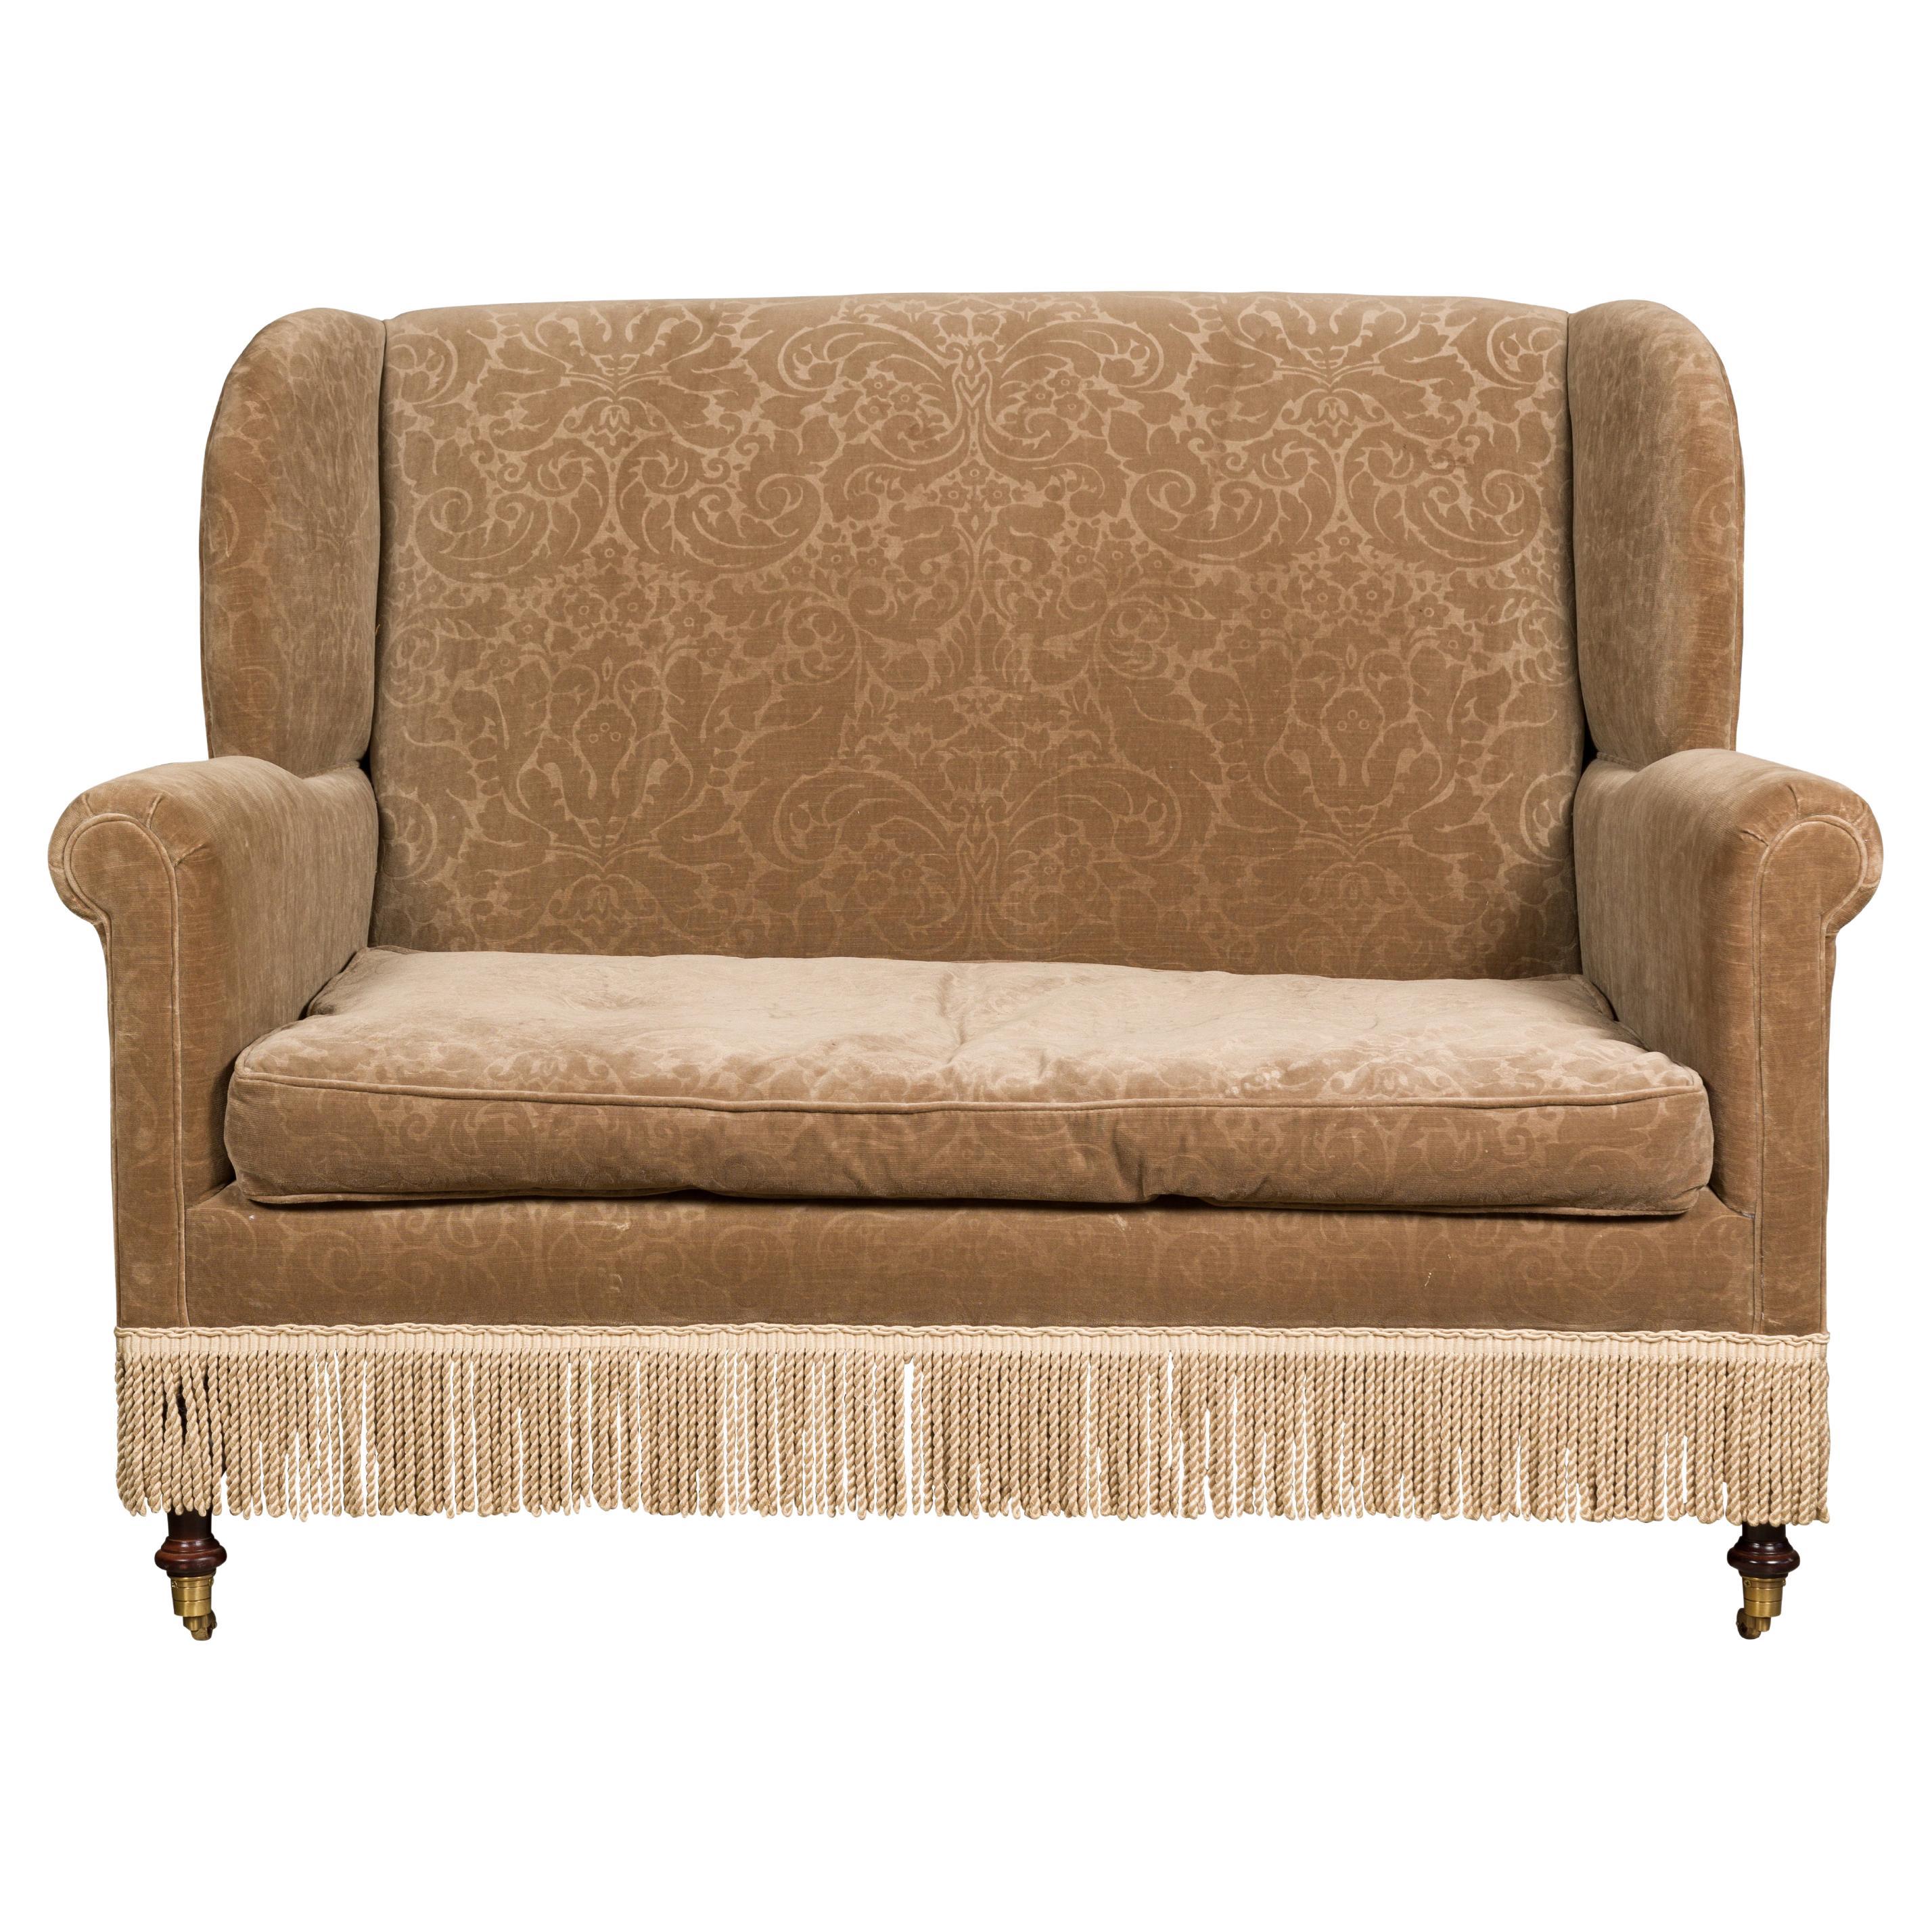 Vintage English Upholstered Loveseat with Out-Scrolling Arms and Casters For Sale